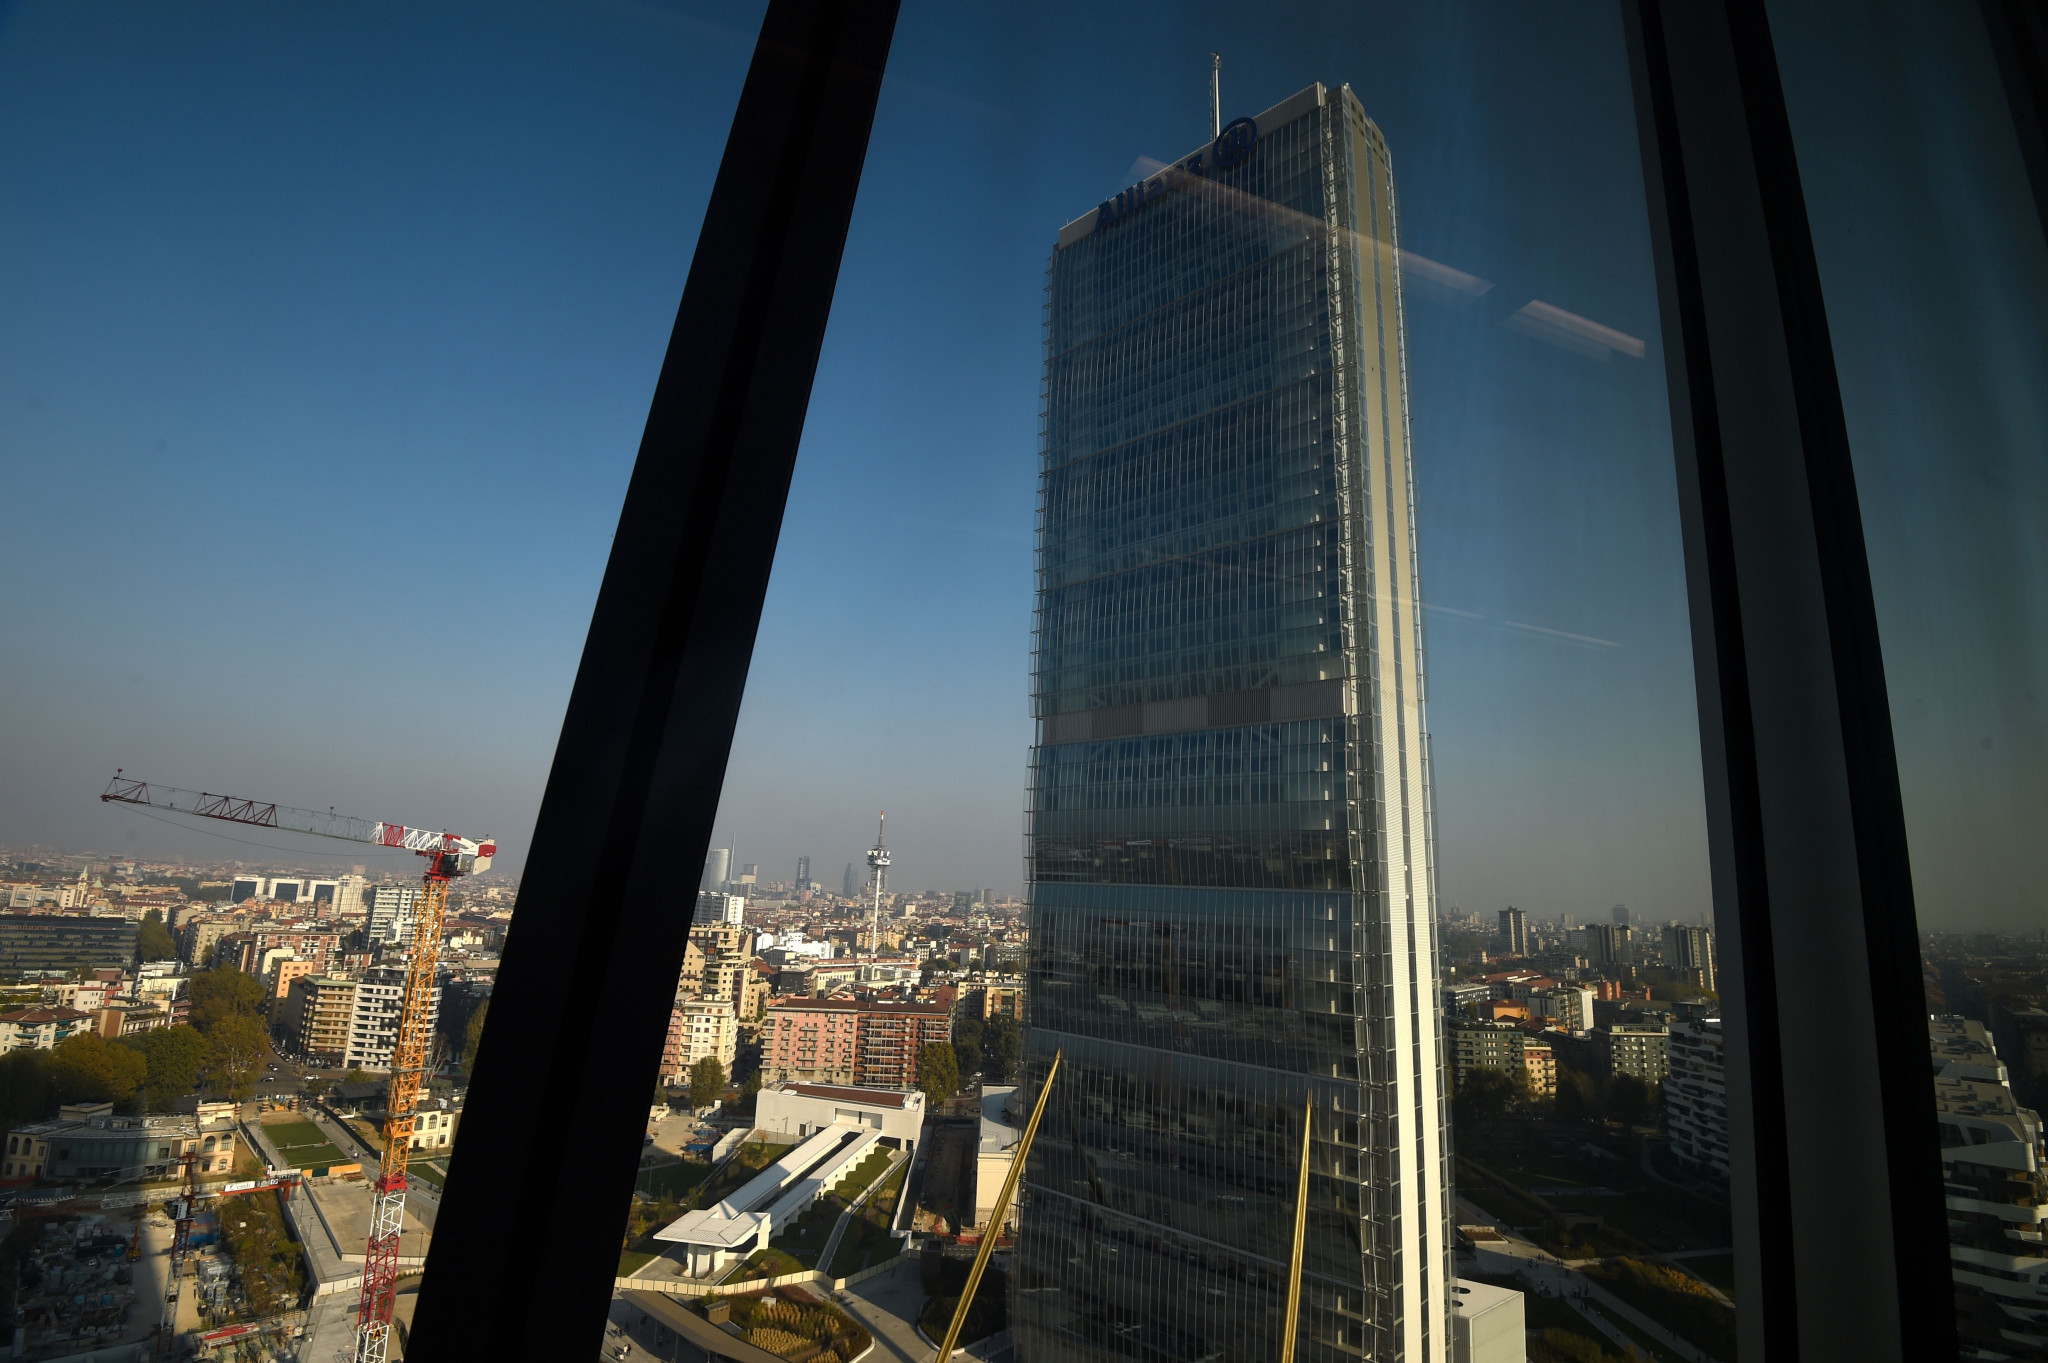 Milan Cortina 2026 to house Organising Committee in Allianz Tower